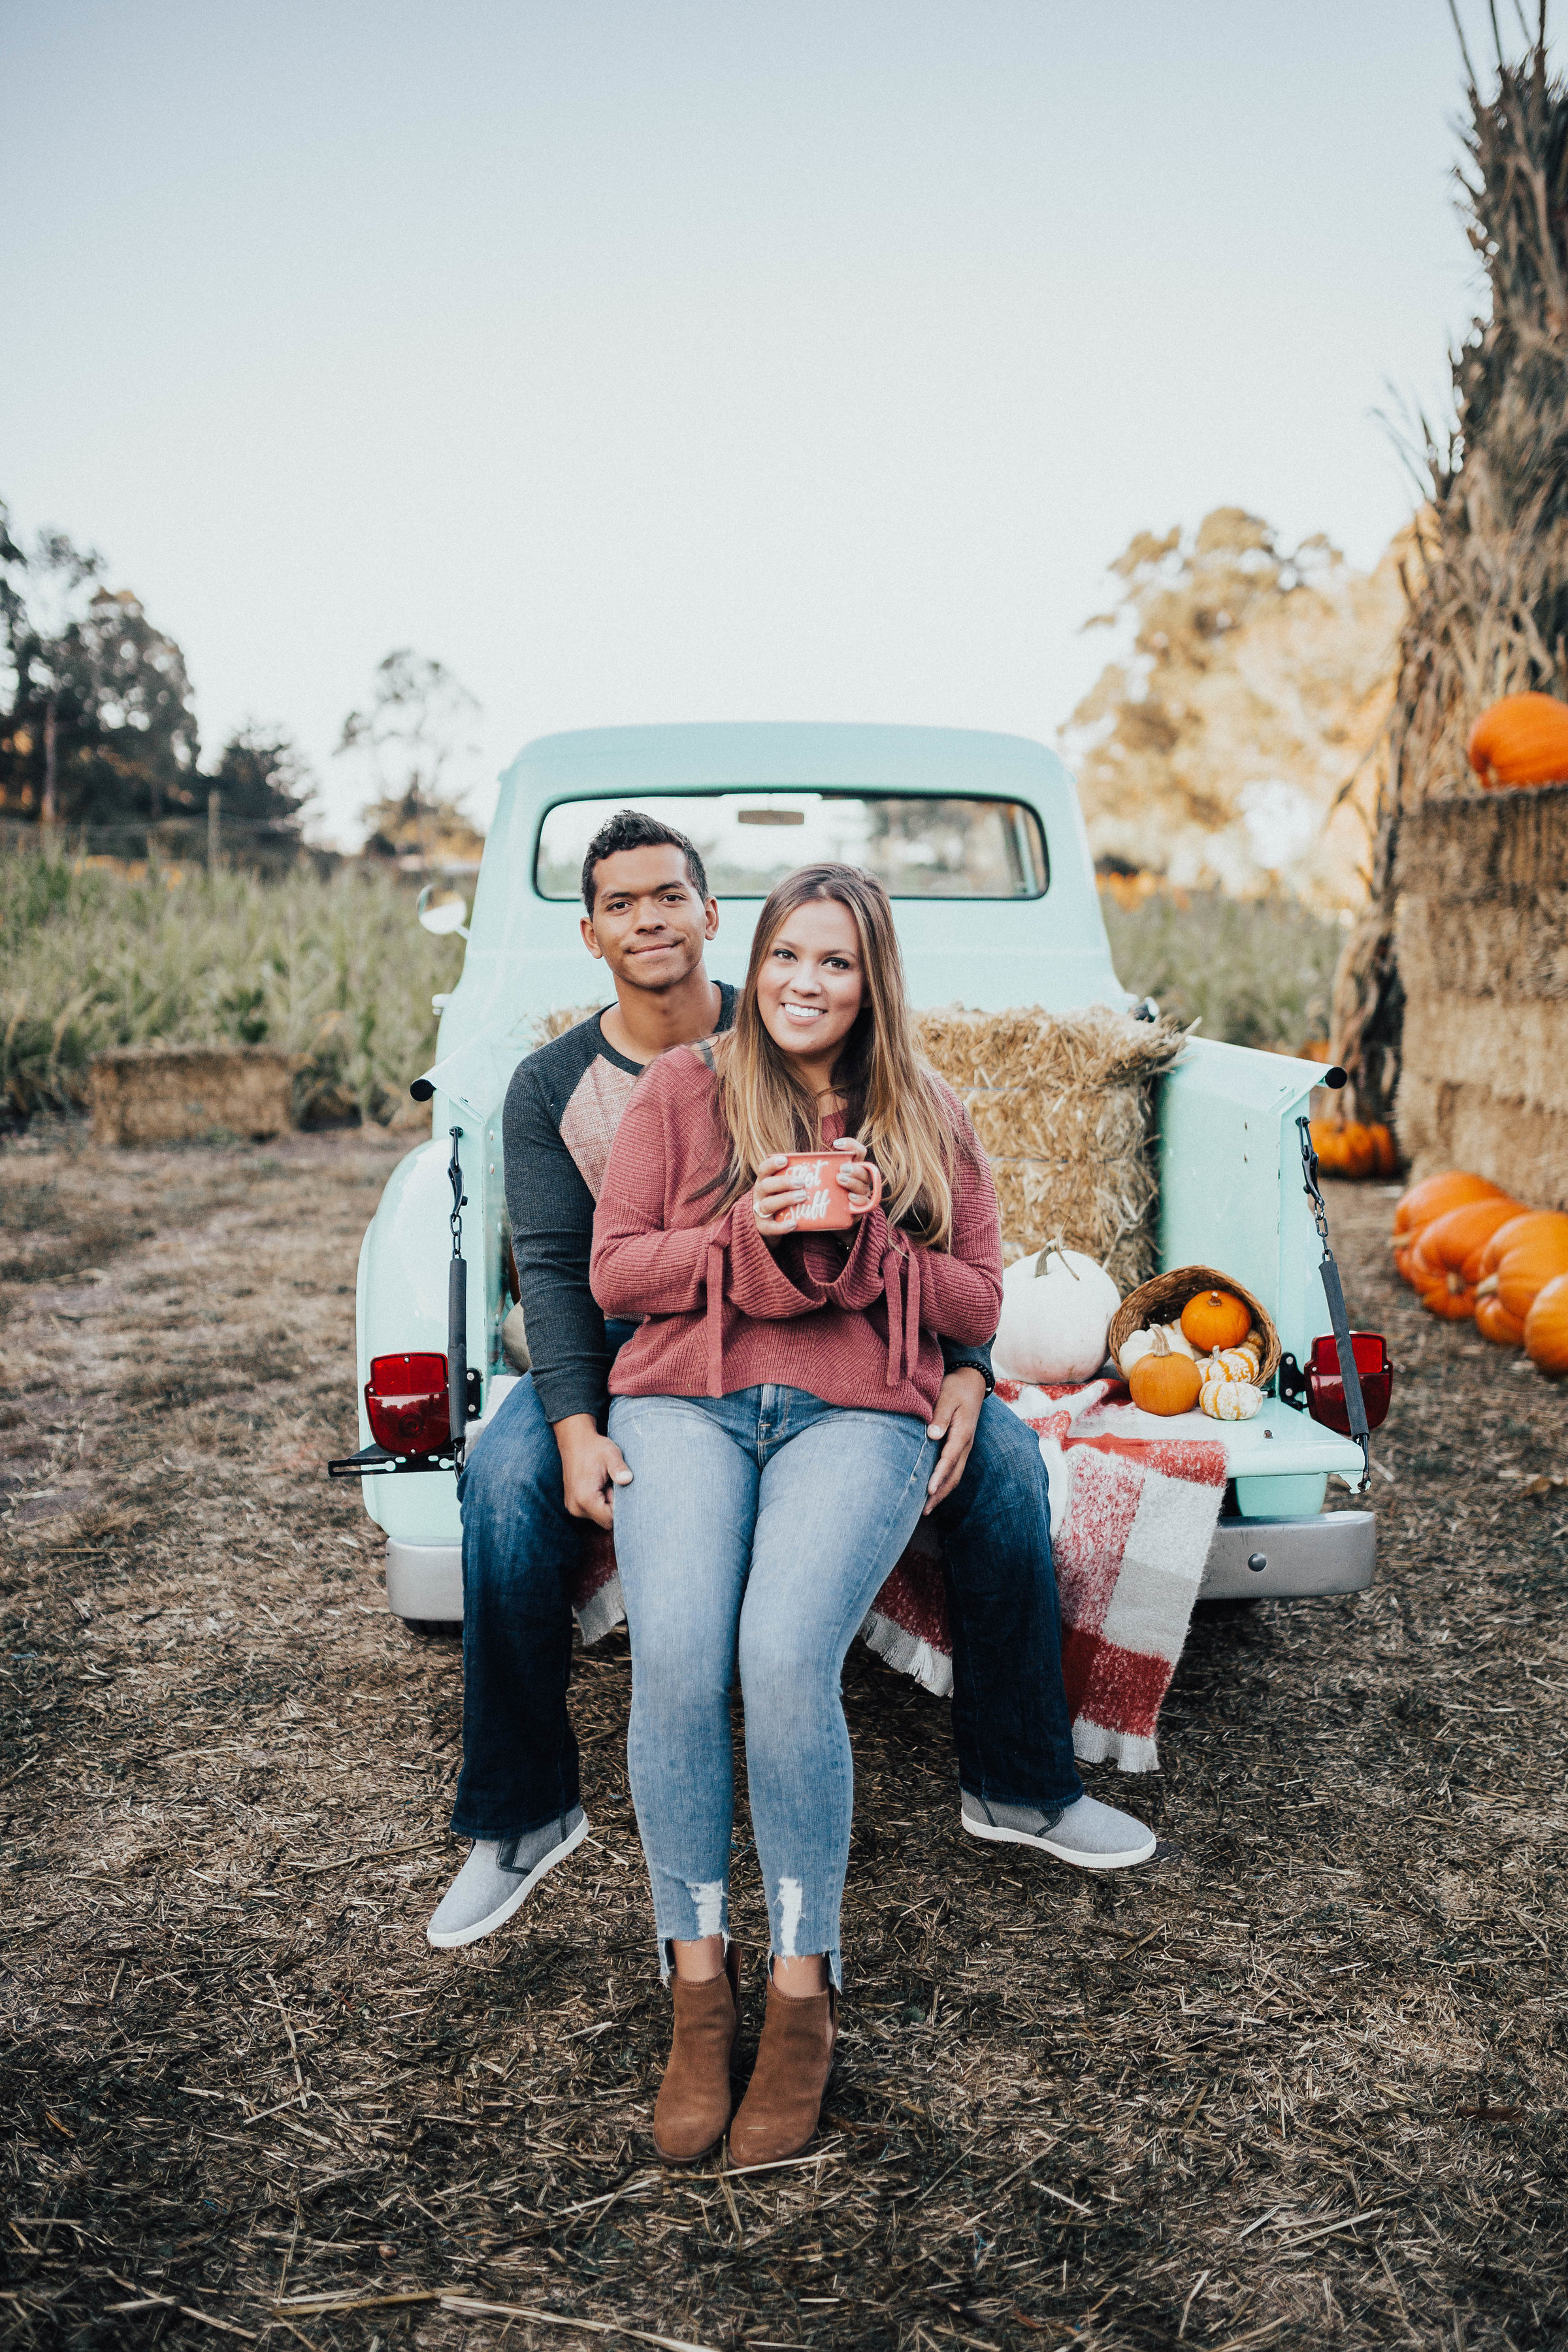 Ashley Zeal from Two Peas in a Prada shares her trip to Arata's Pumpkin farm in Half Moon Bay California. She is wearing a sweater from Express. 